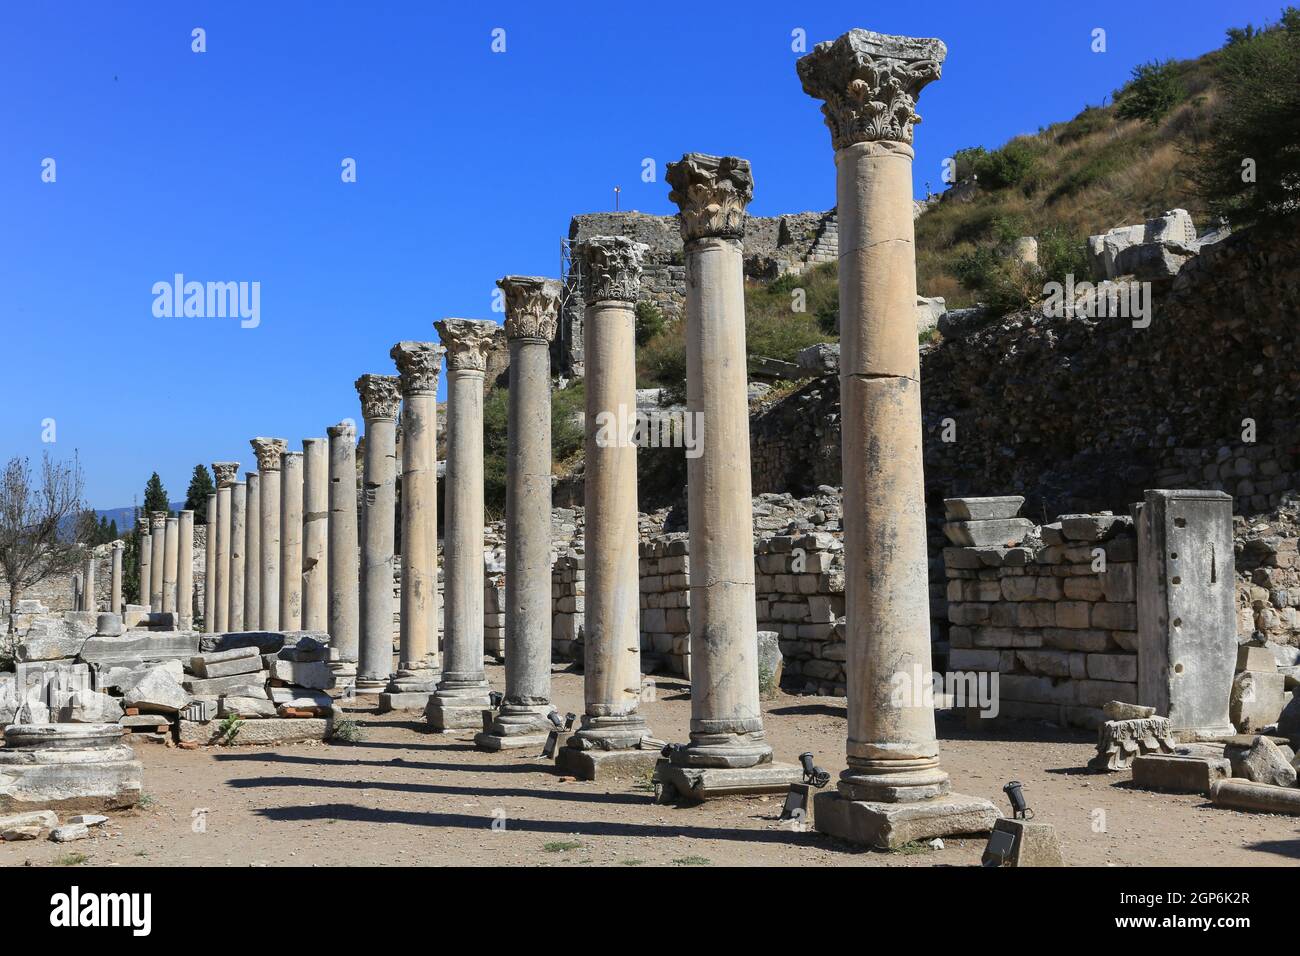 The colonnade along the east side of the agora (Greek public space) in Ephesus, Turkey. Stock Photo